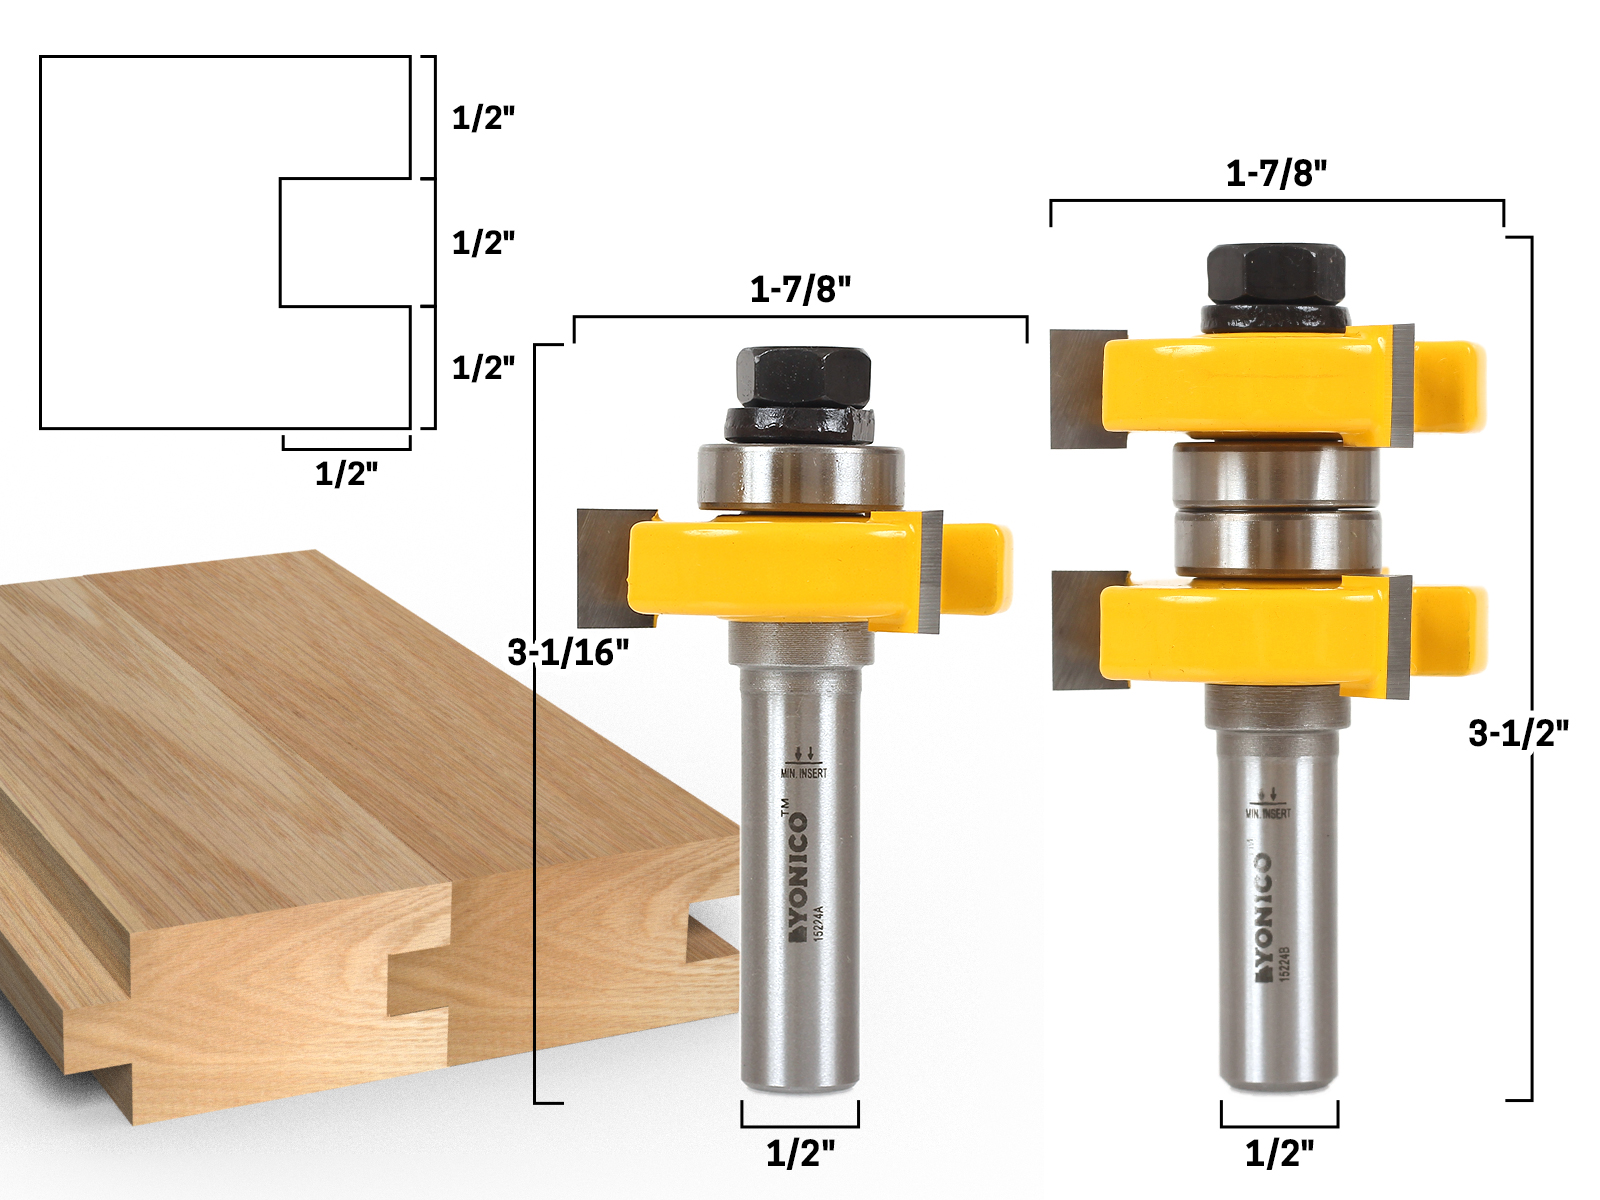 2x Tongue /& Groove Router Bits 1//4 Shank Woodworking Chisel Cutters Milling